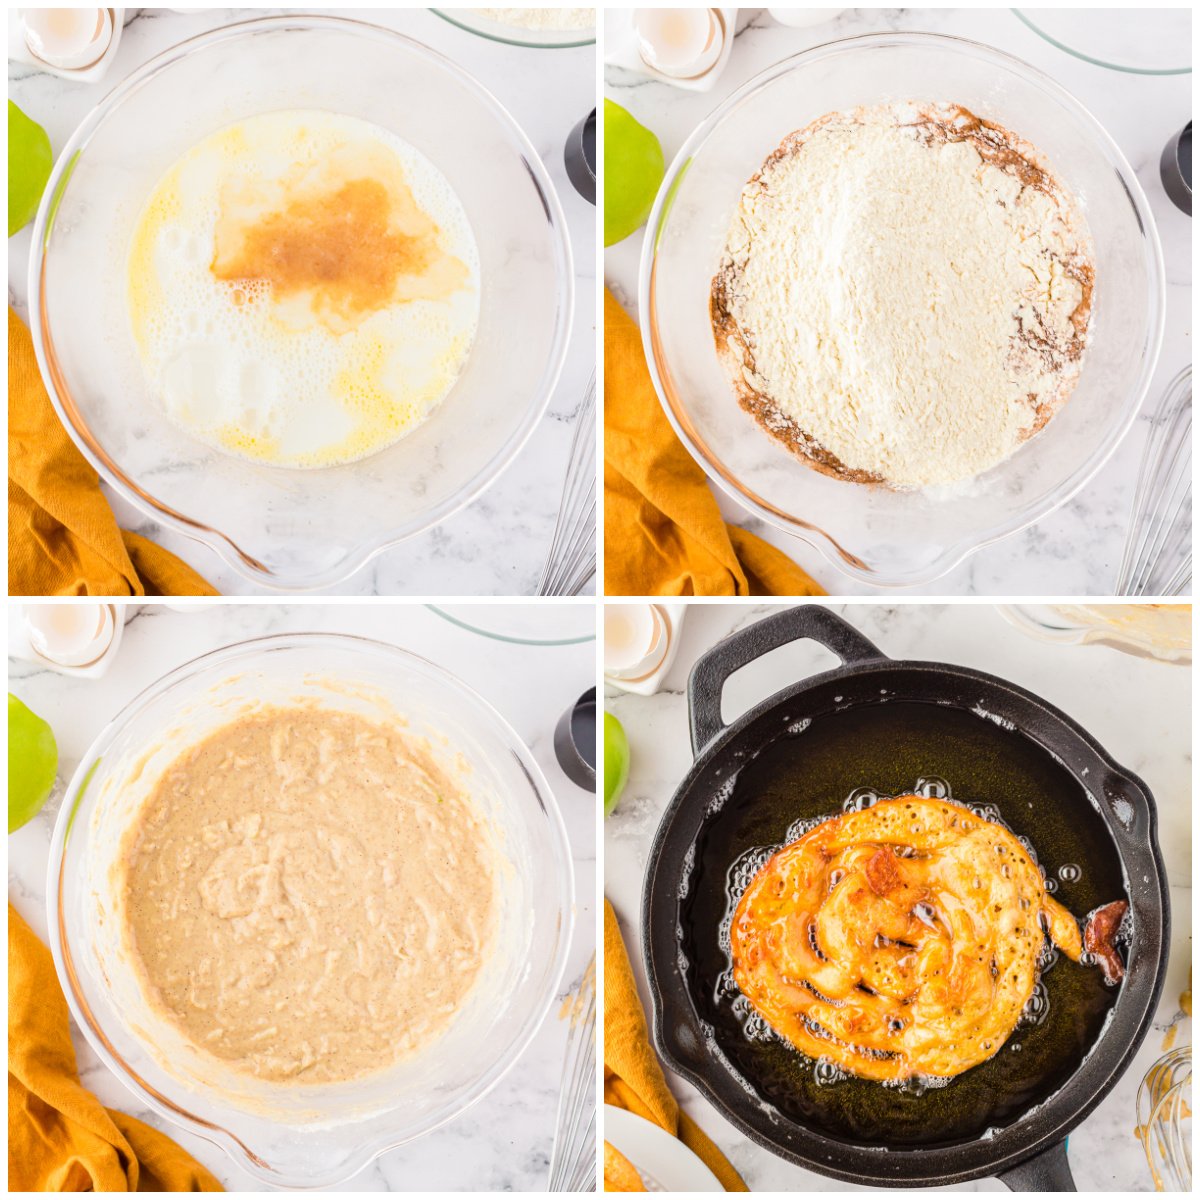 Step by step photos on how to make Caramel Apple Funnel Cakes